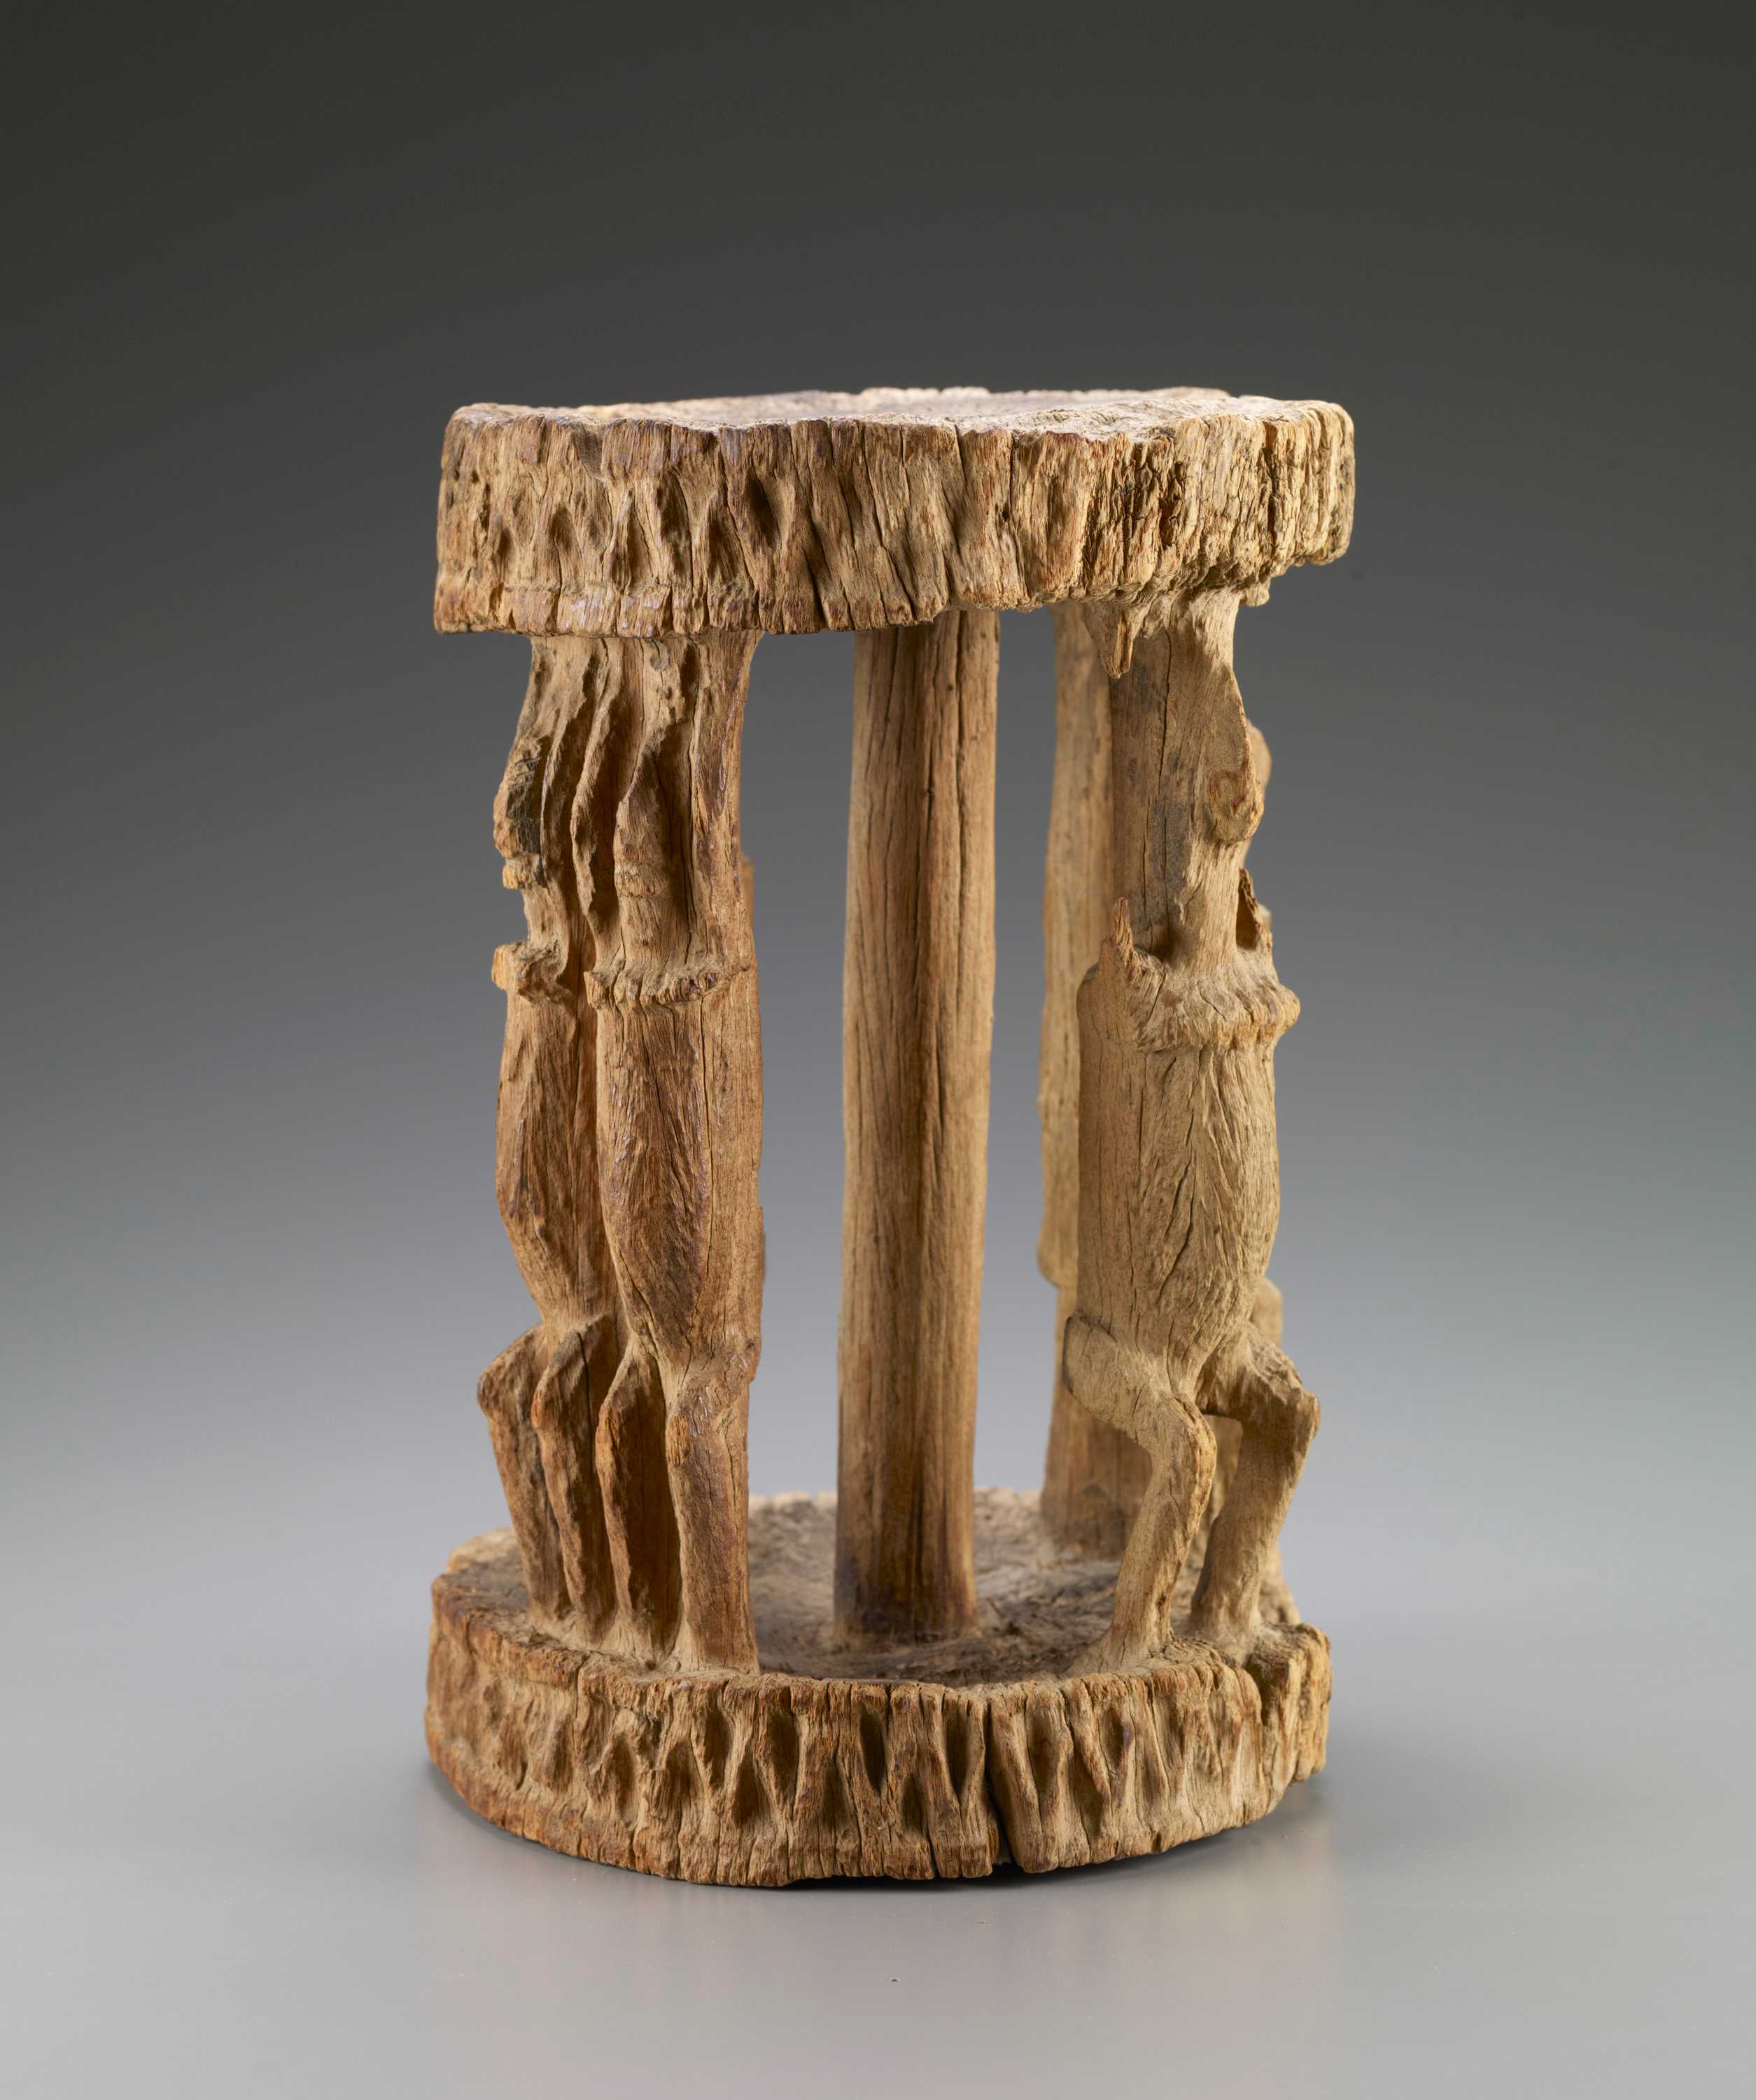 A wooden carved stool of three figures holding the top of the stool and carved patten into ends.